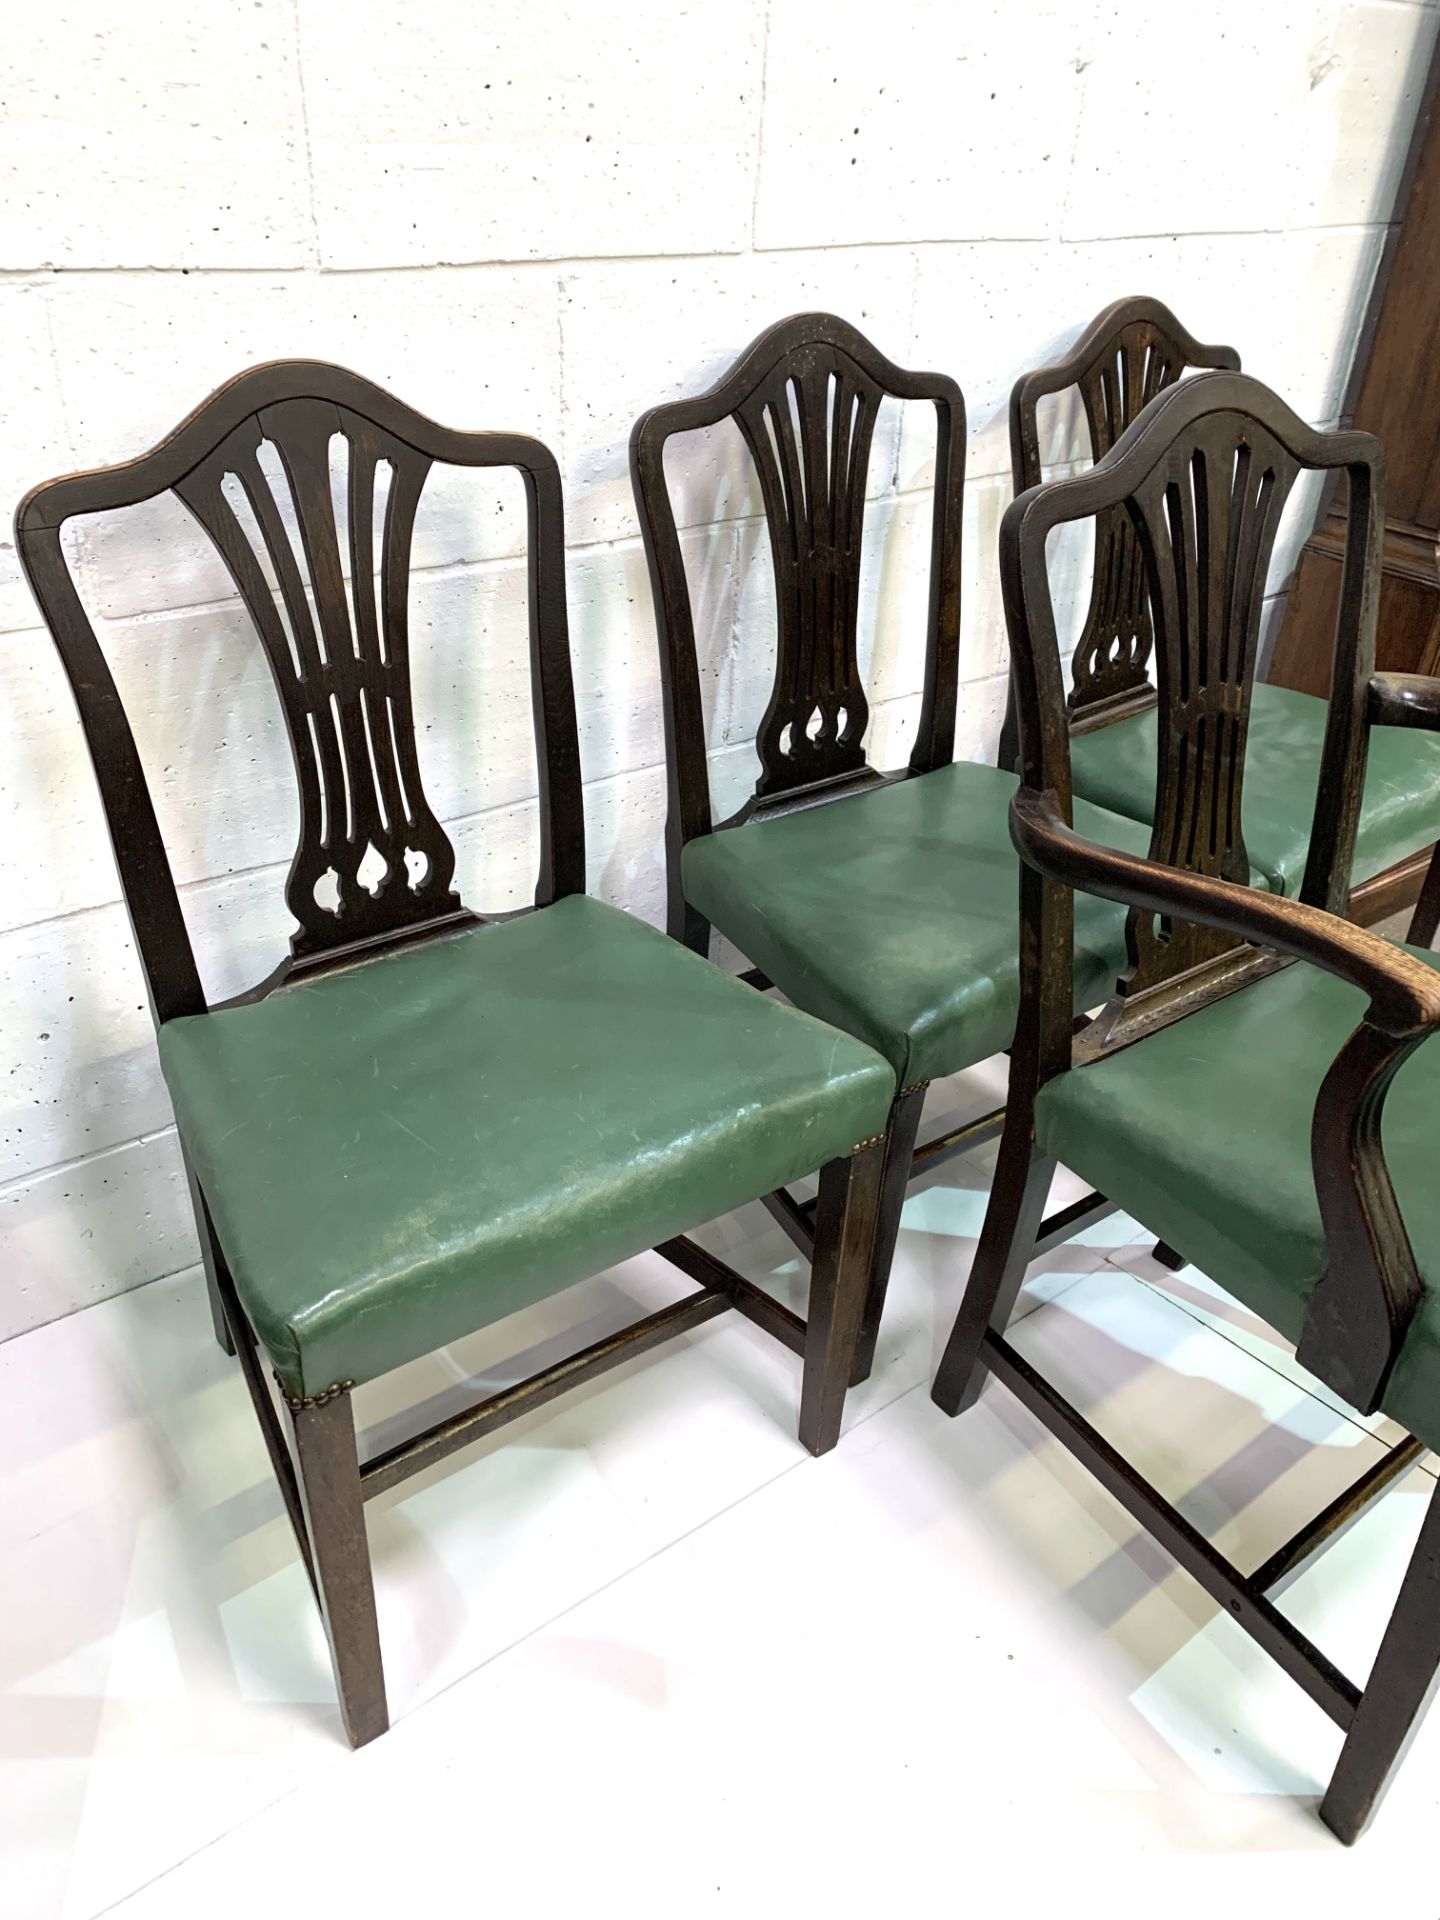 Set of four Victorian dining chairs, three plus one, upholstered in green leather. - Image 3 of 5